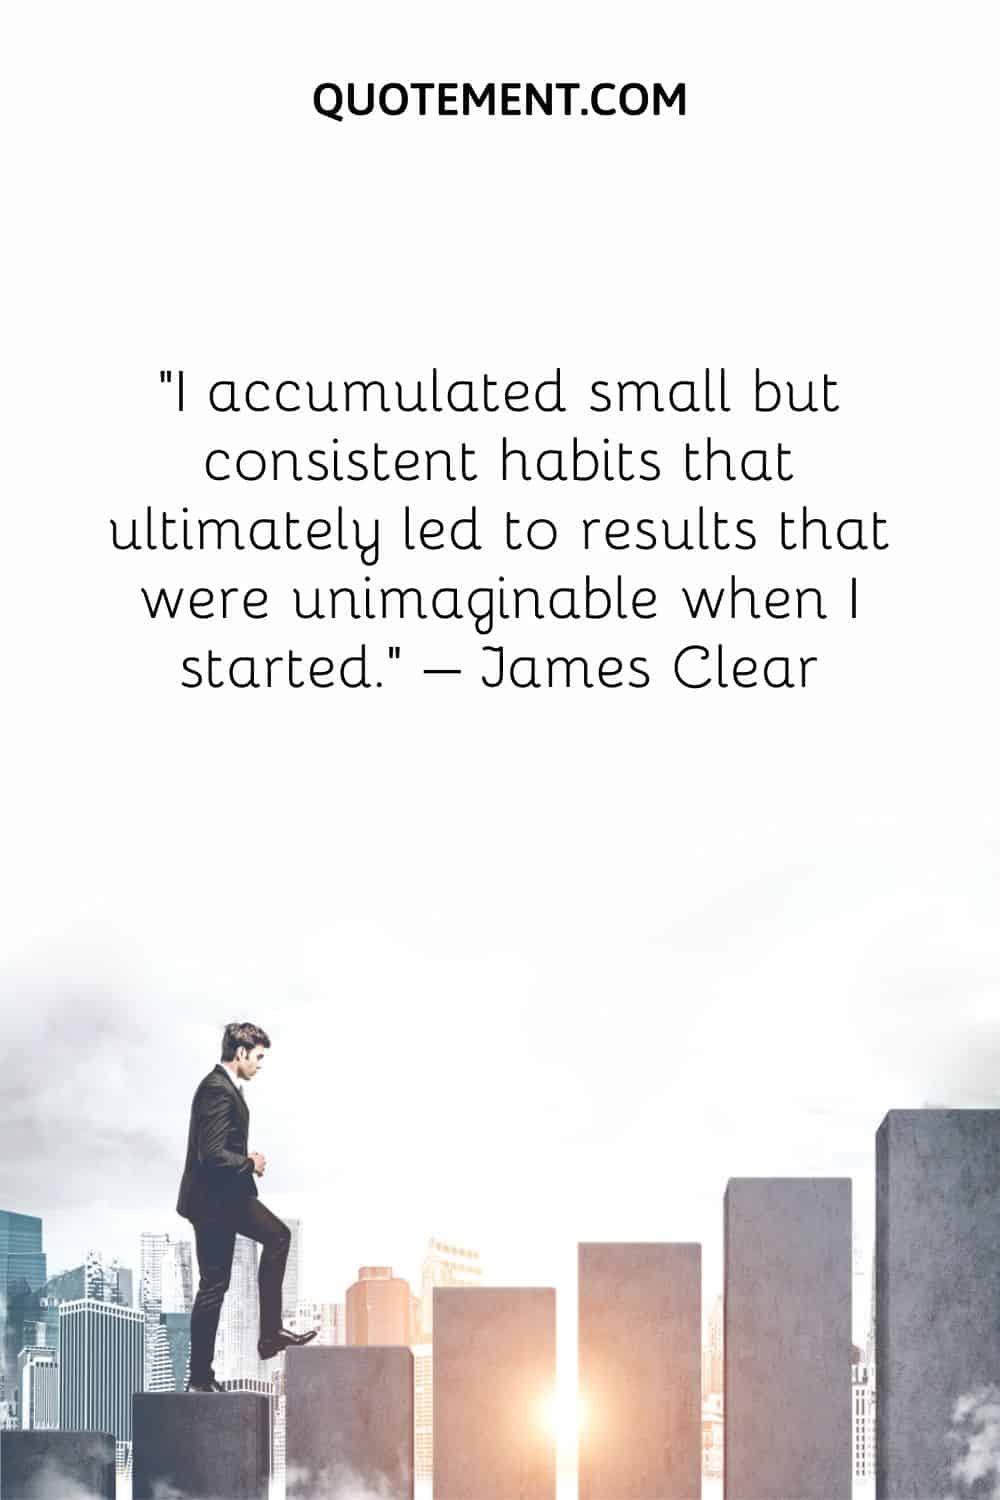 I accumulated small but consistent habits that ultimately led to results that were unimaginable when I started.